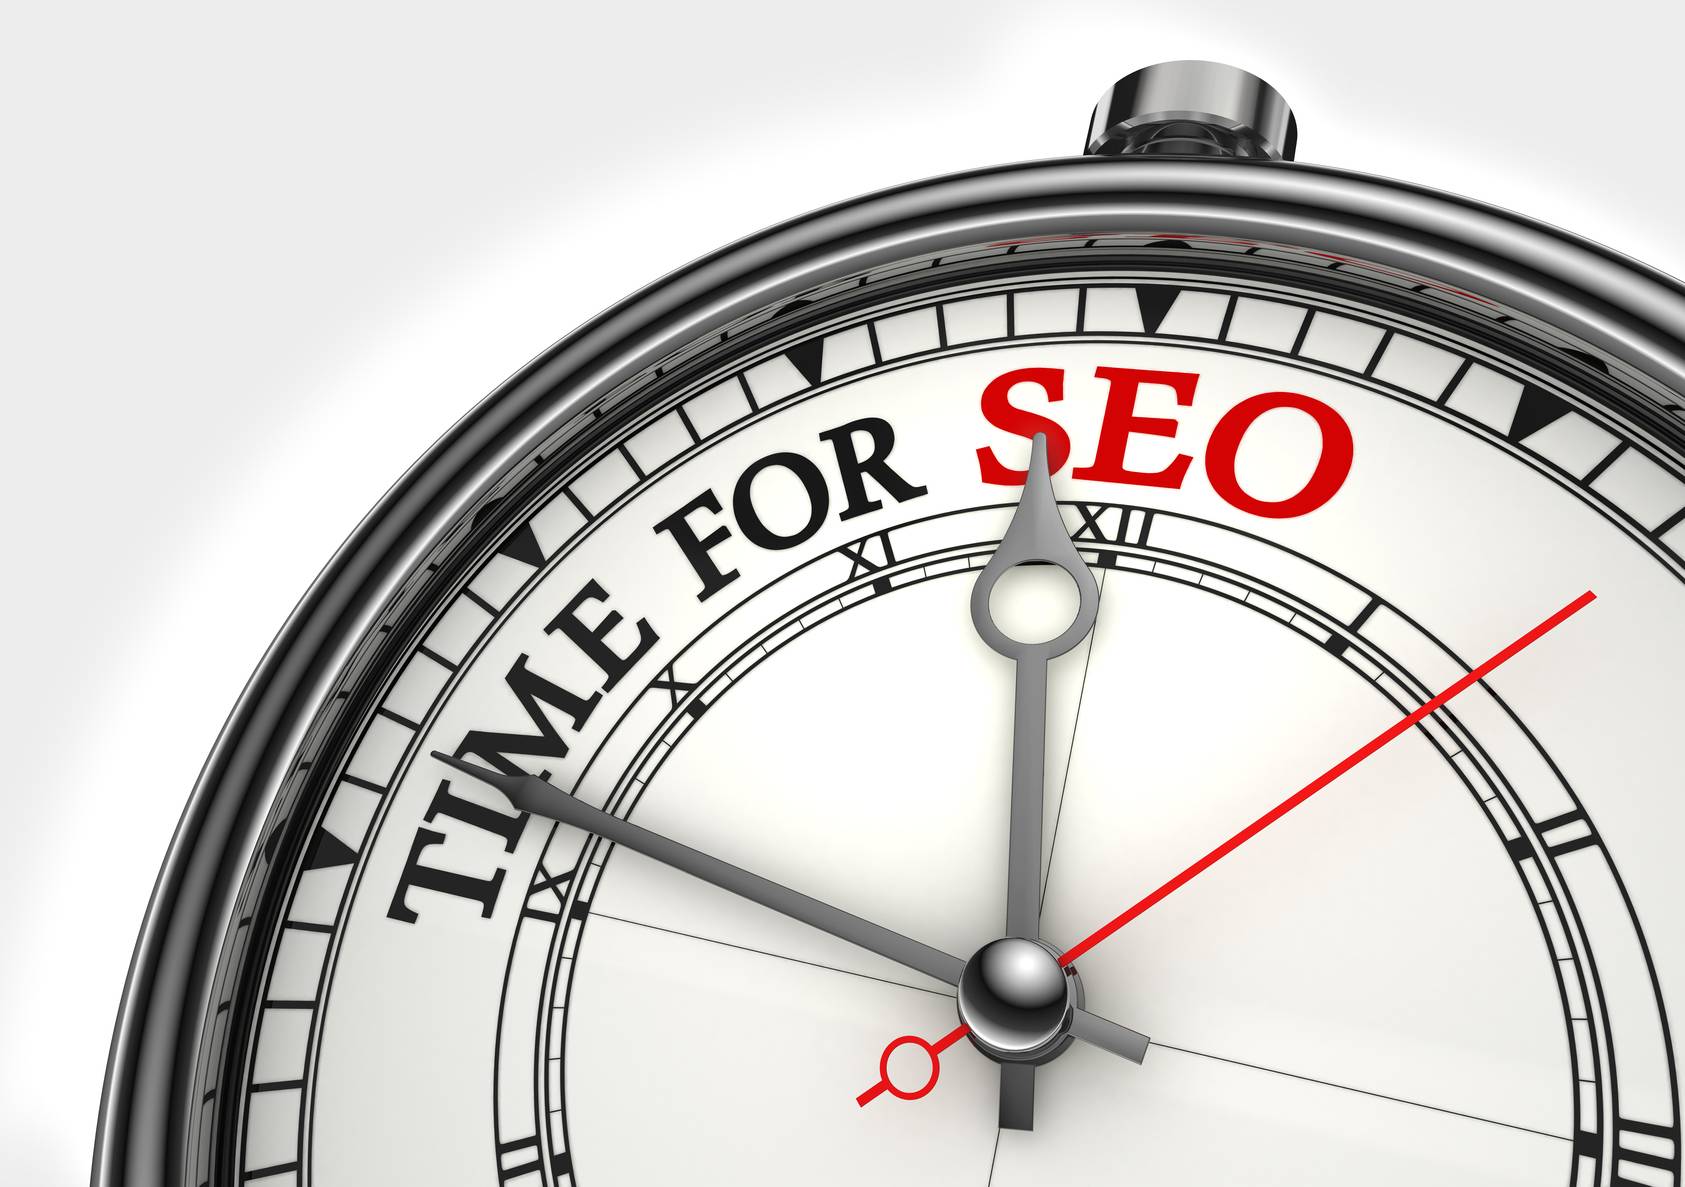 SEO Company McKinney TX: Know What You Need To Know